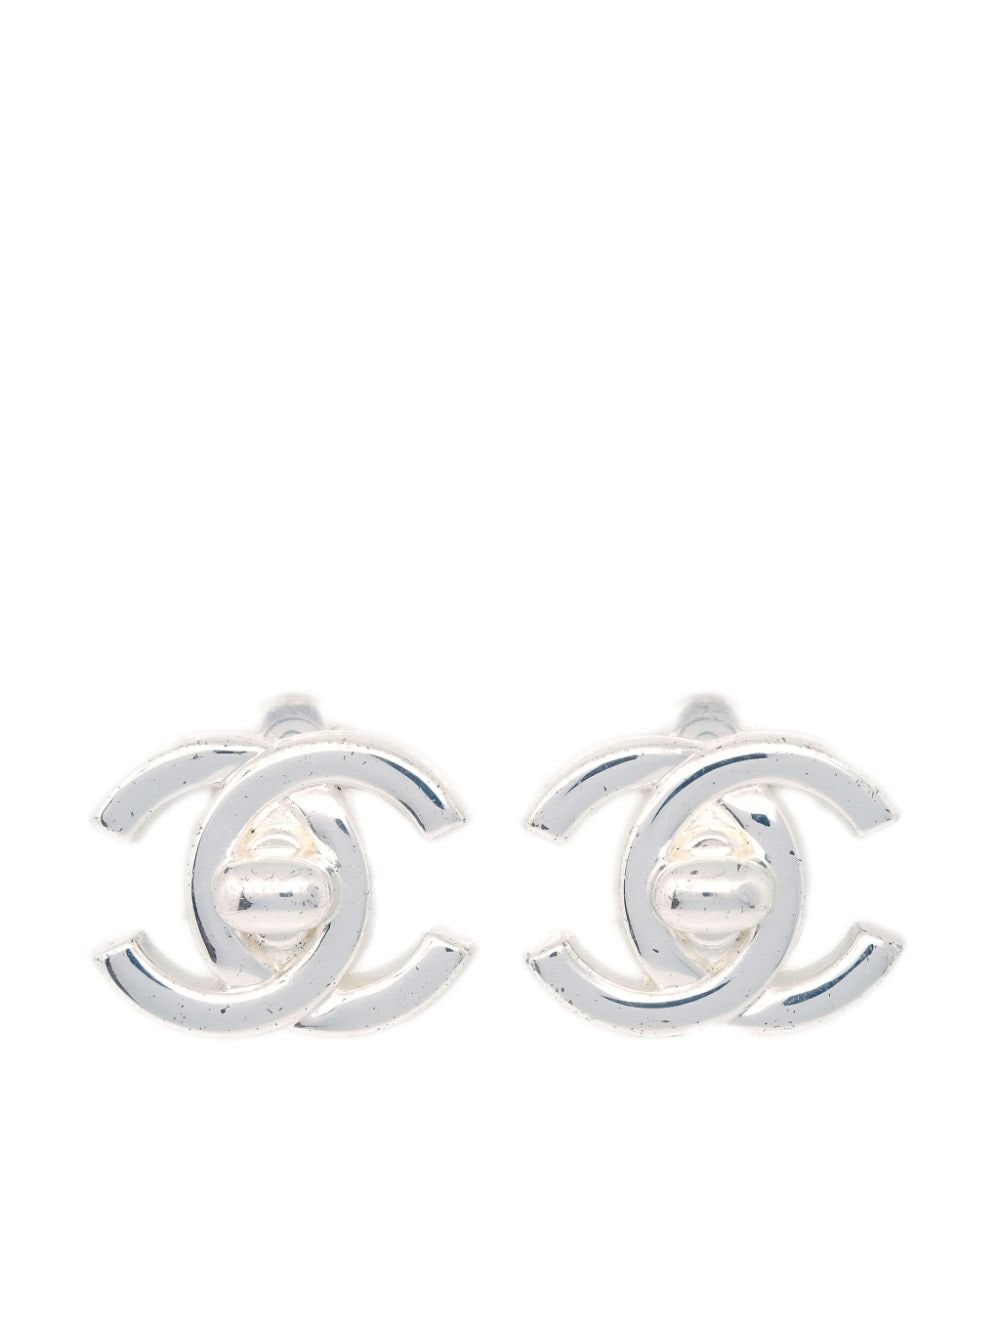 1997 silver plated CC Turnlock clip-on earrings